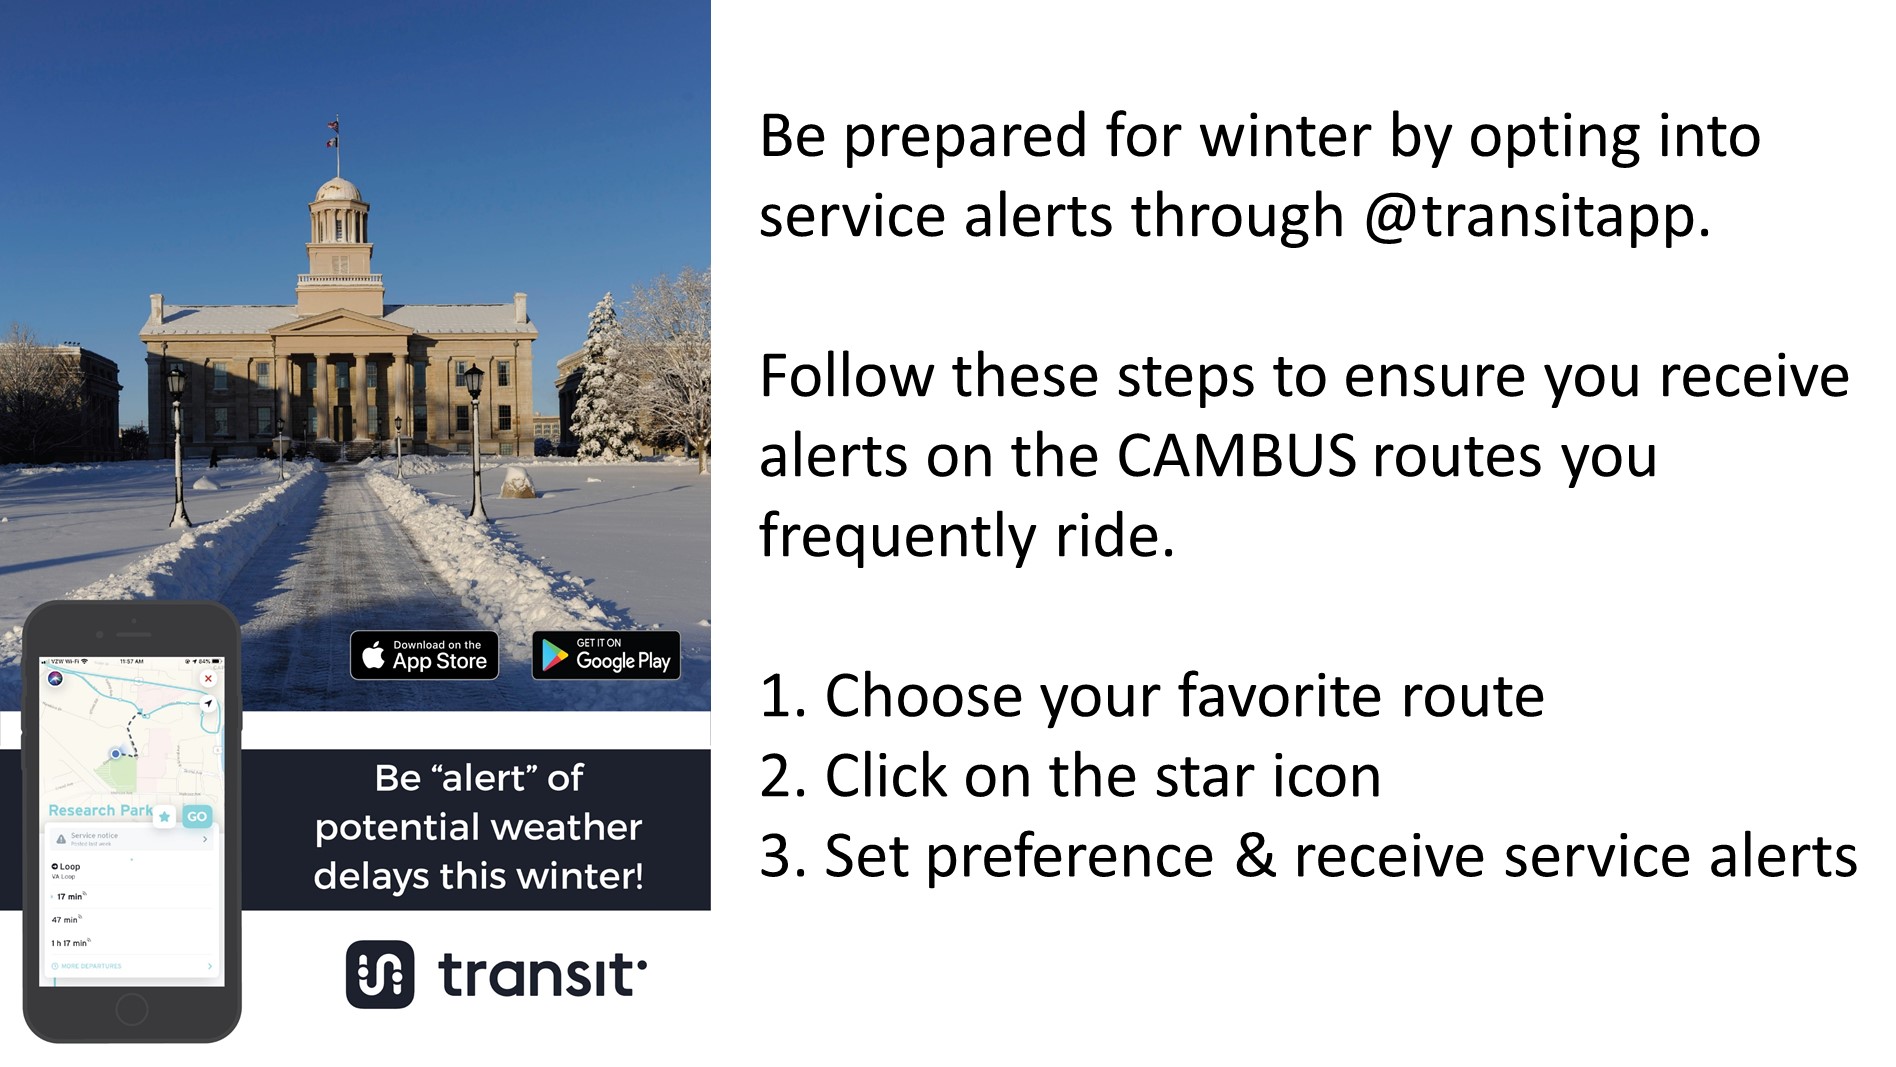 Use Transit app for Cambus winter service alerts